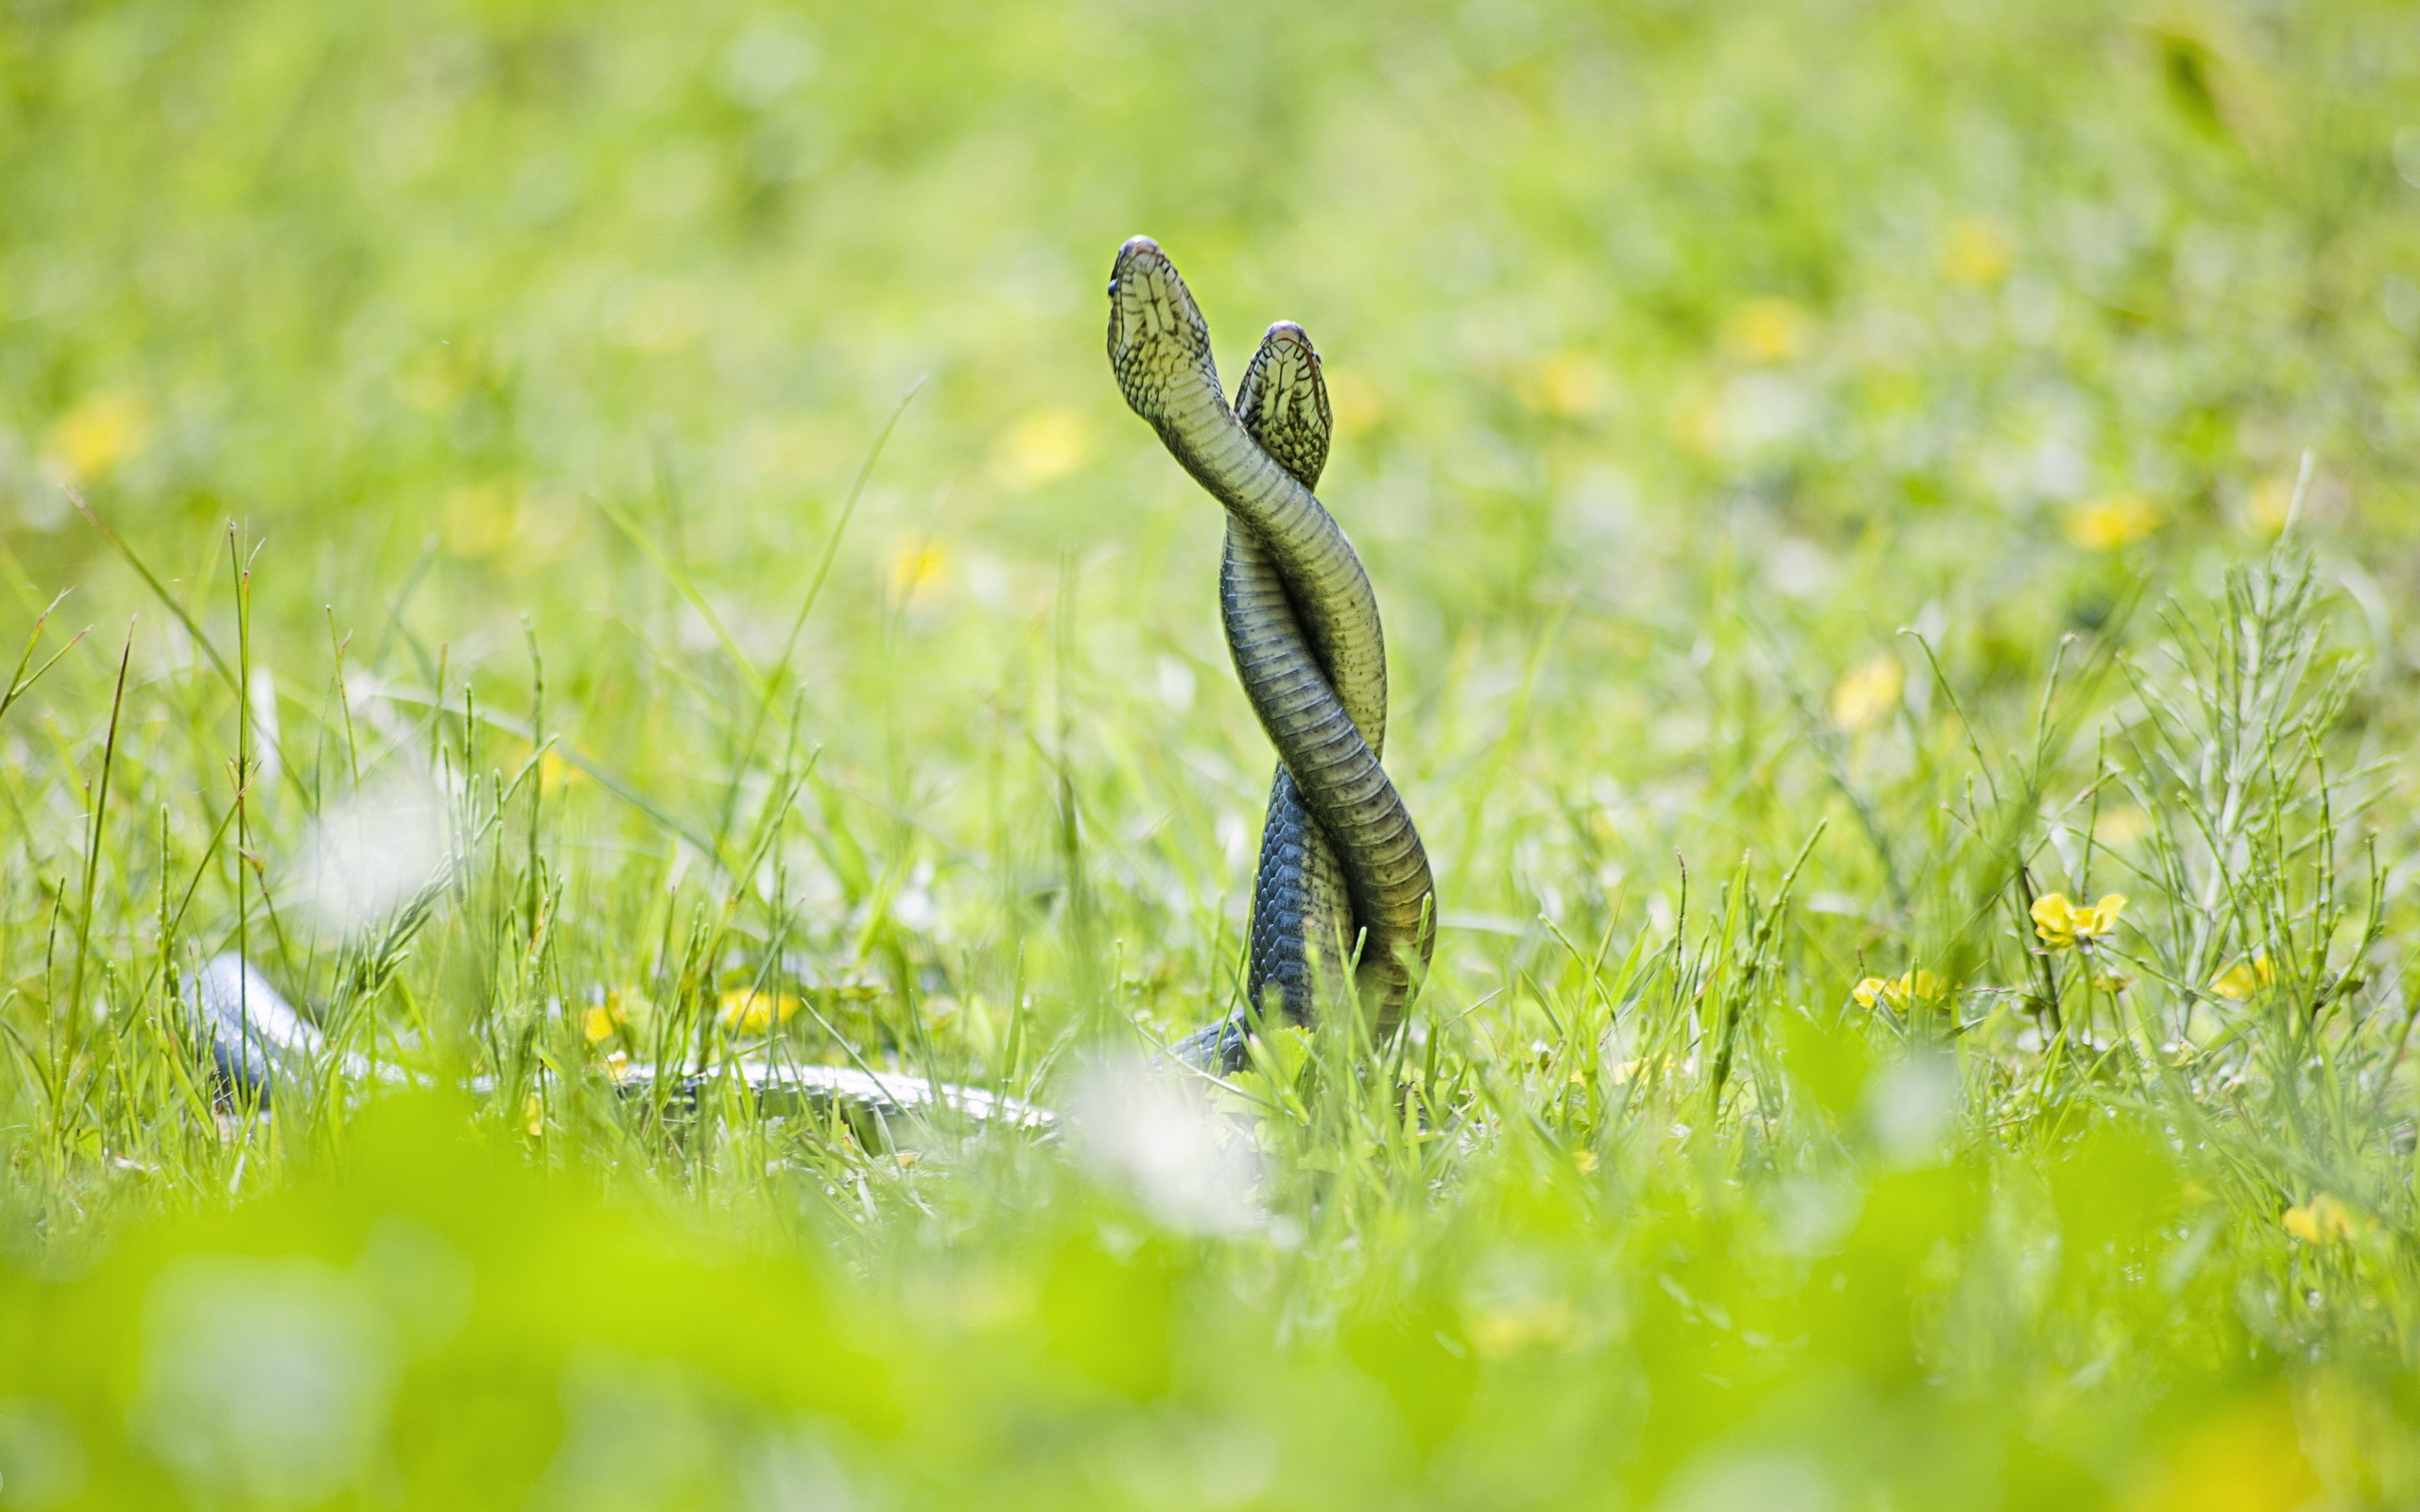 General 2560x1600 snake animals reptiles grass nature outdoors